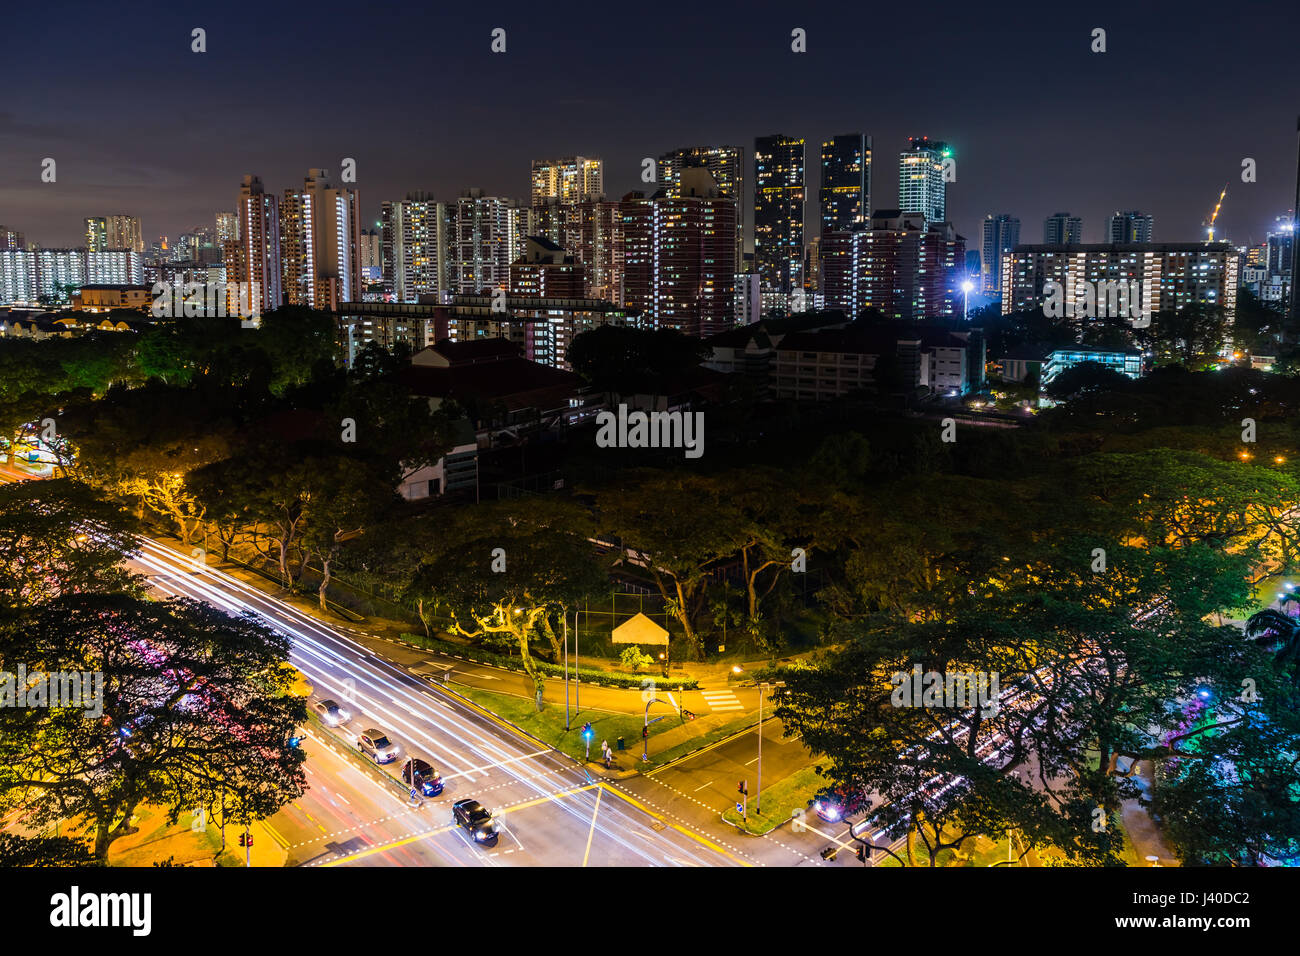 View of the Downtown Singapore skyline, night scene long exposure with traffic and car trails Stock Photo